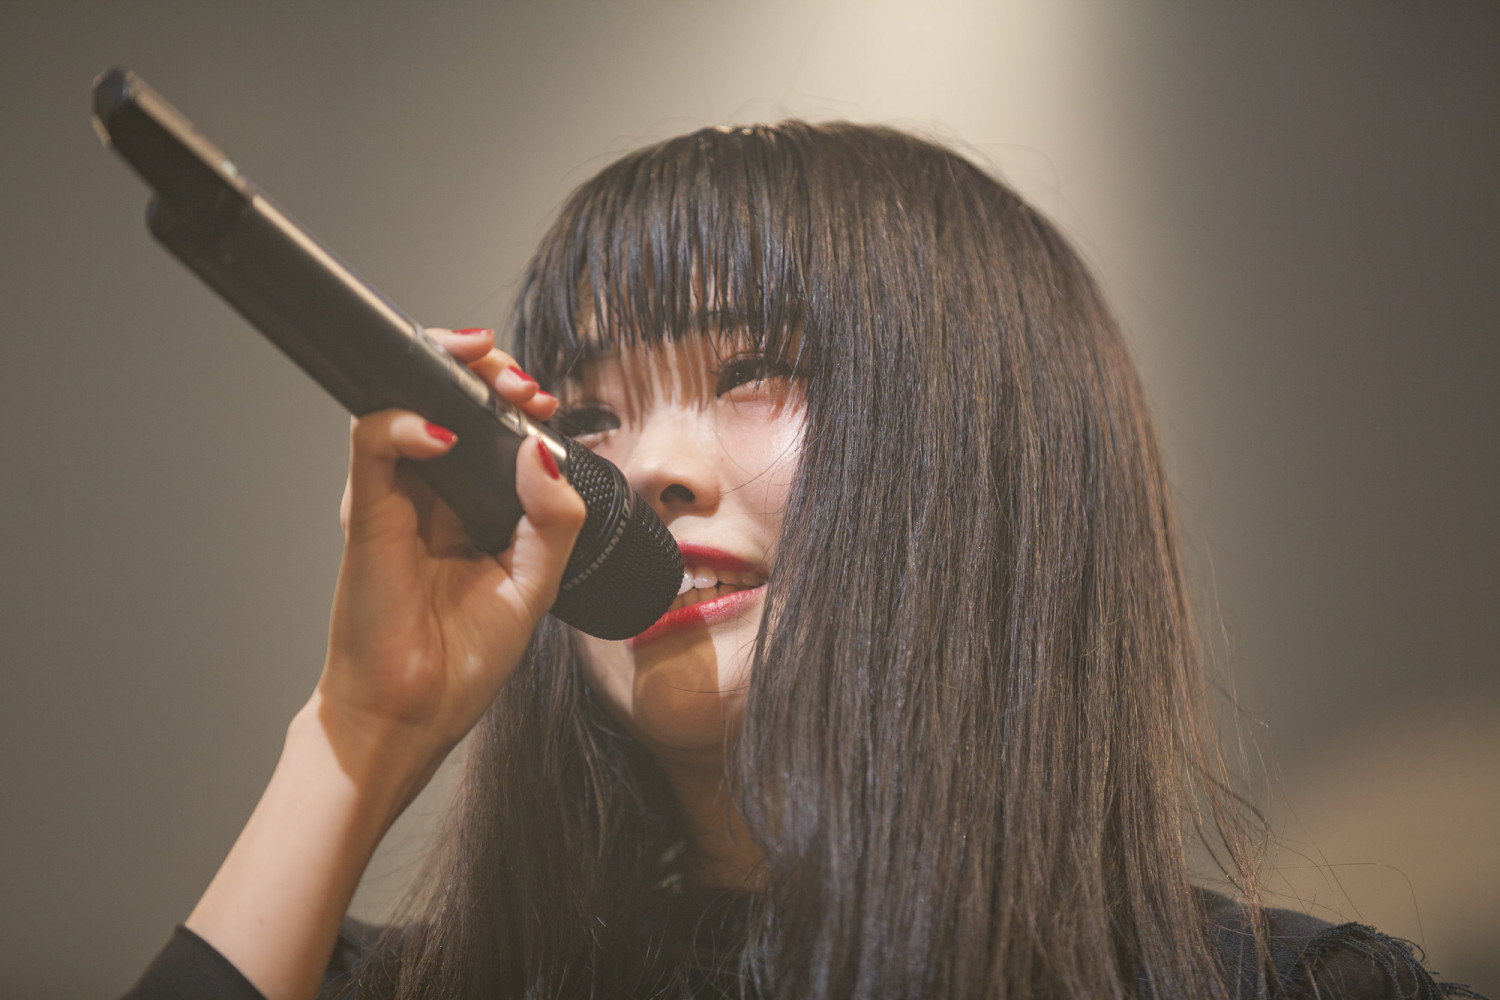 Aina the End Vows to Return as Invincible! BiSH Ends 2016 With Scorching Free Live “iN THE END”!